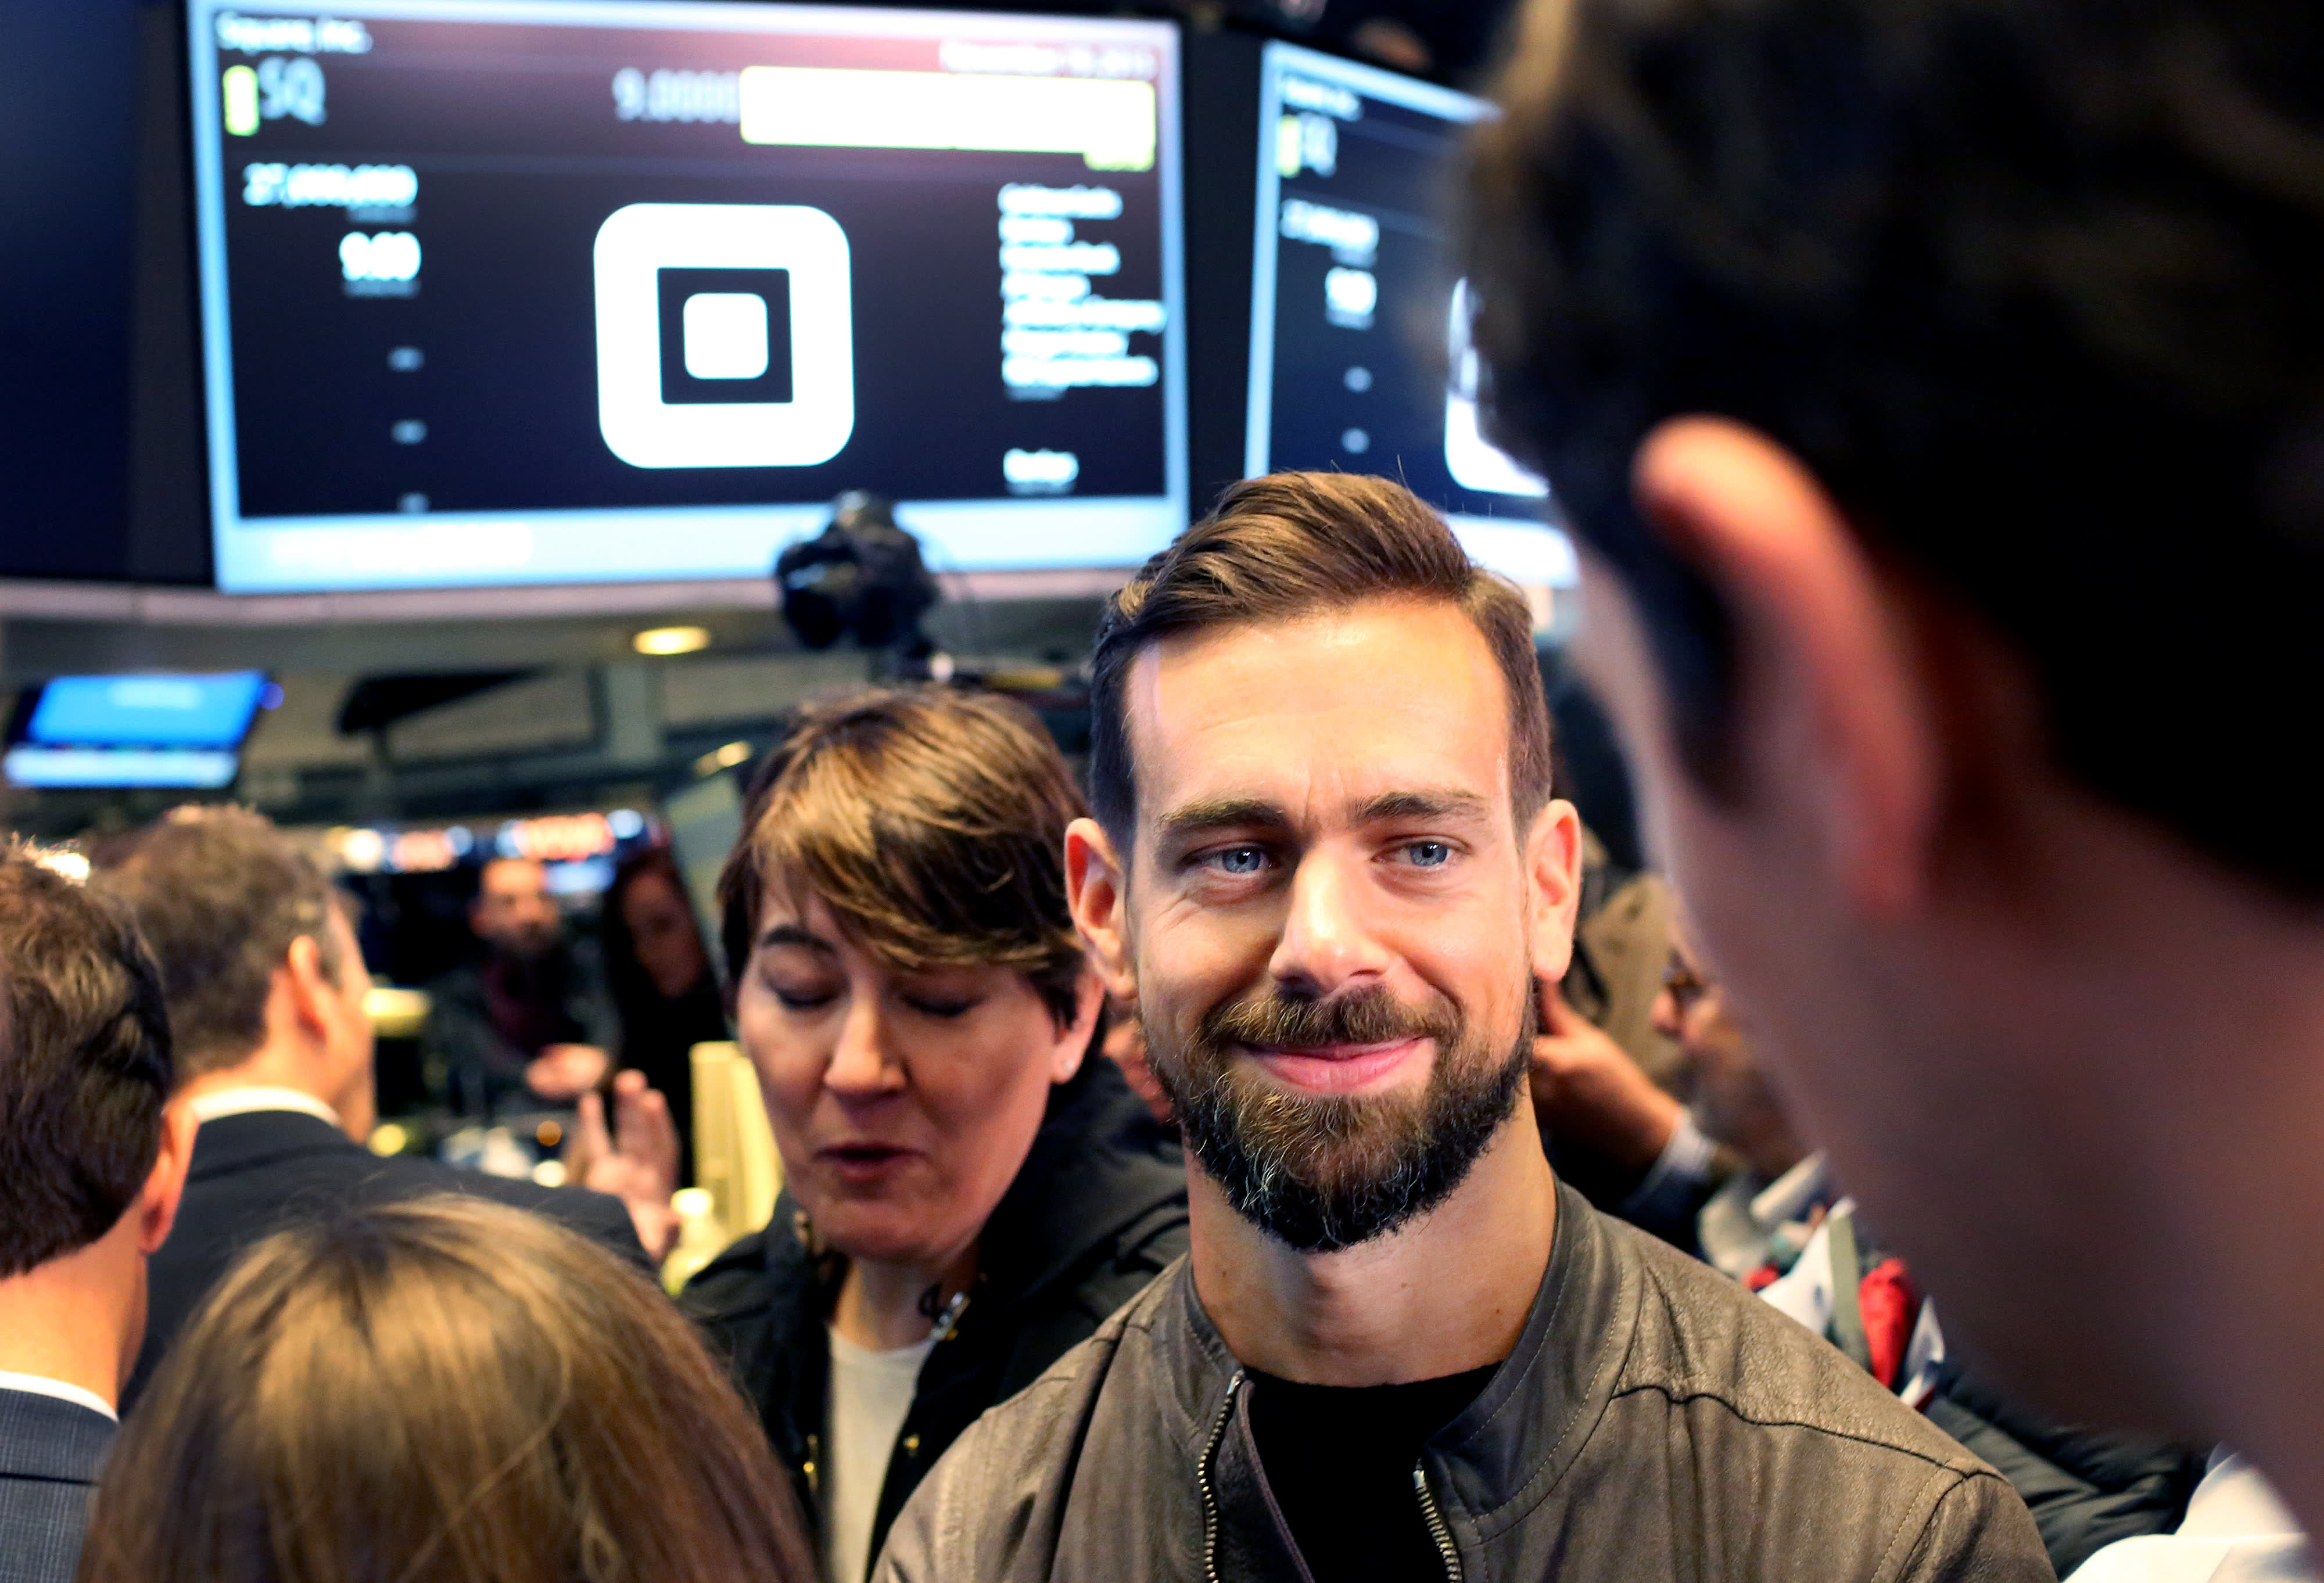 Square’s shares jump after Jack Dorsey’s company launches its own bank